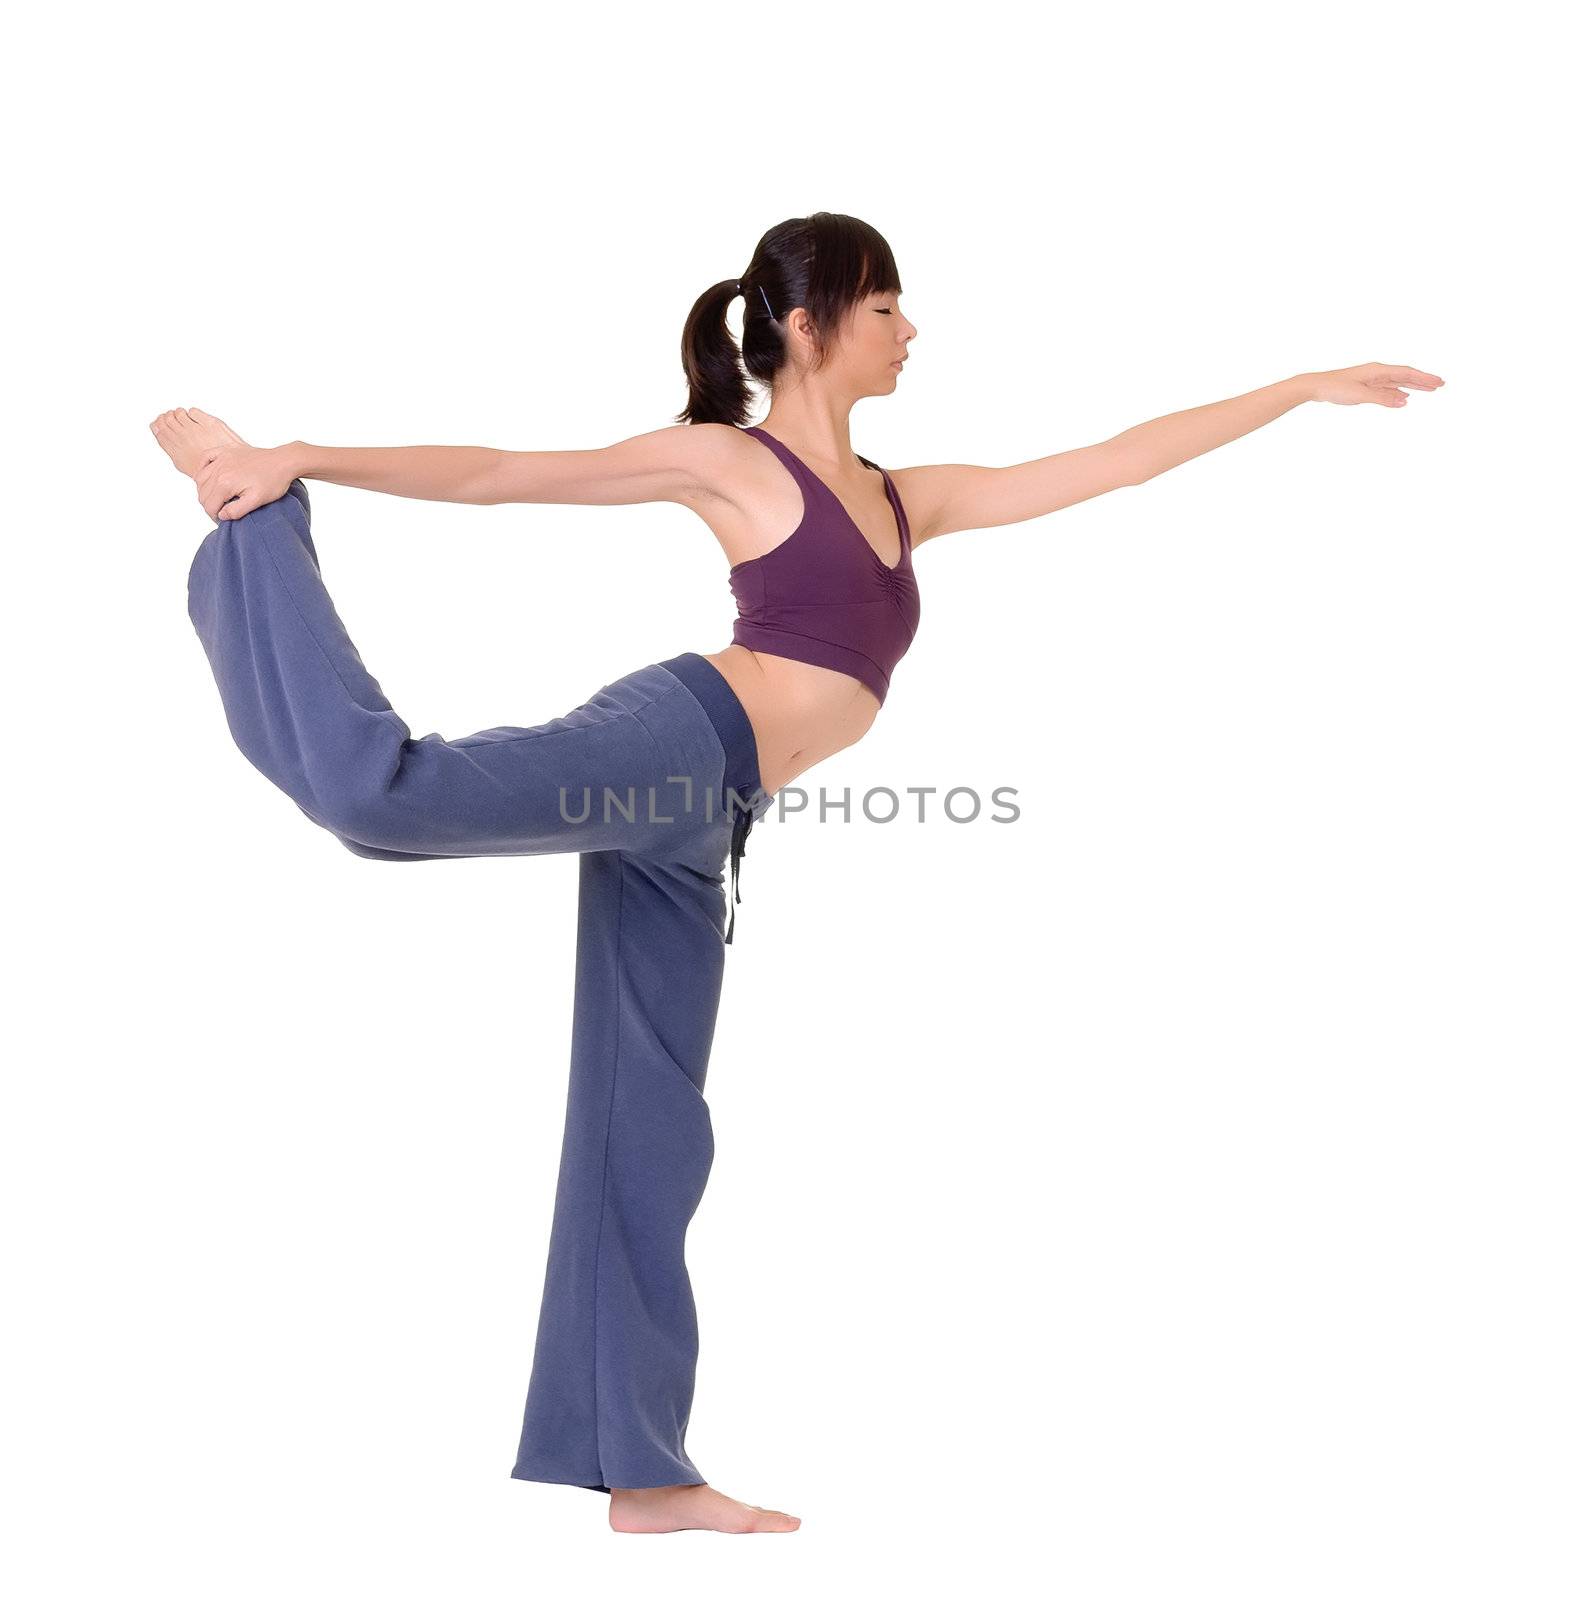 Expert yoga pose by young Asian woman, isolated over white.